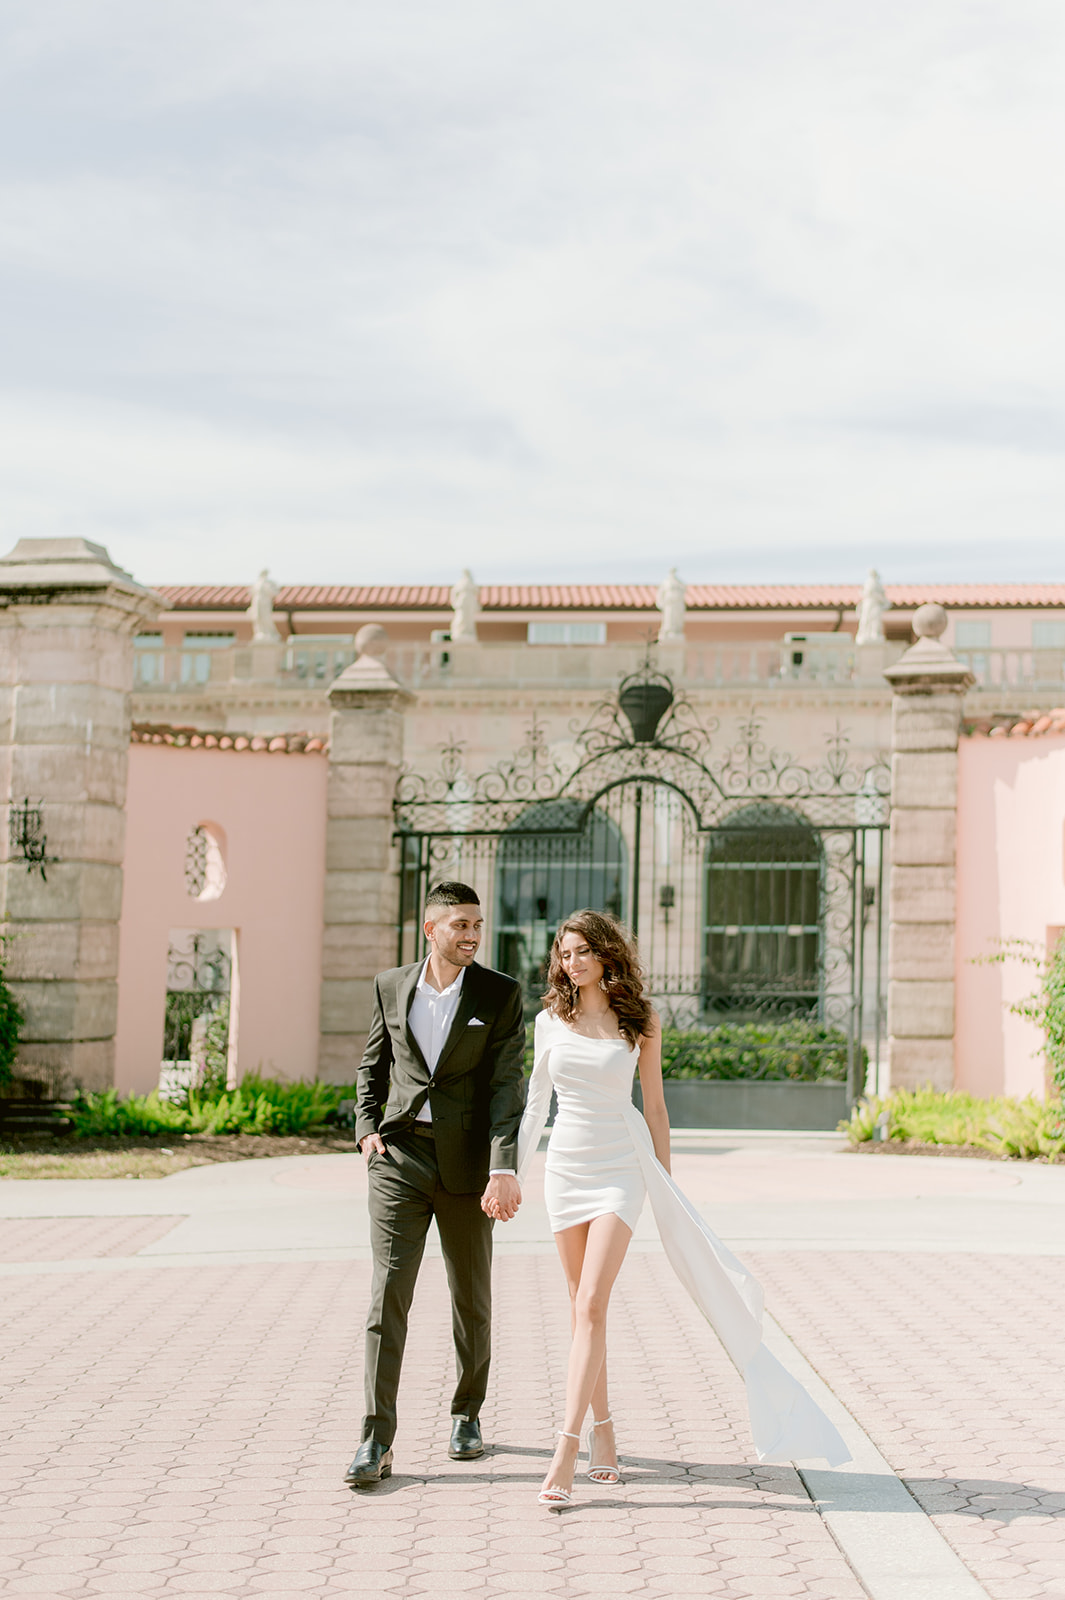 "Ringling Museum engagement shoot captures the beauty and elegance of Indian culture and love"
